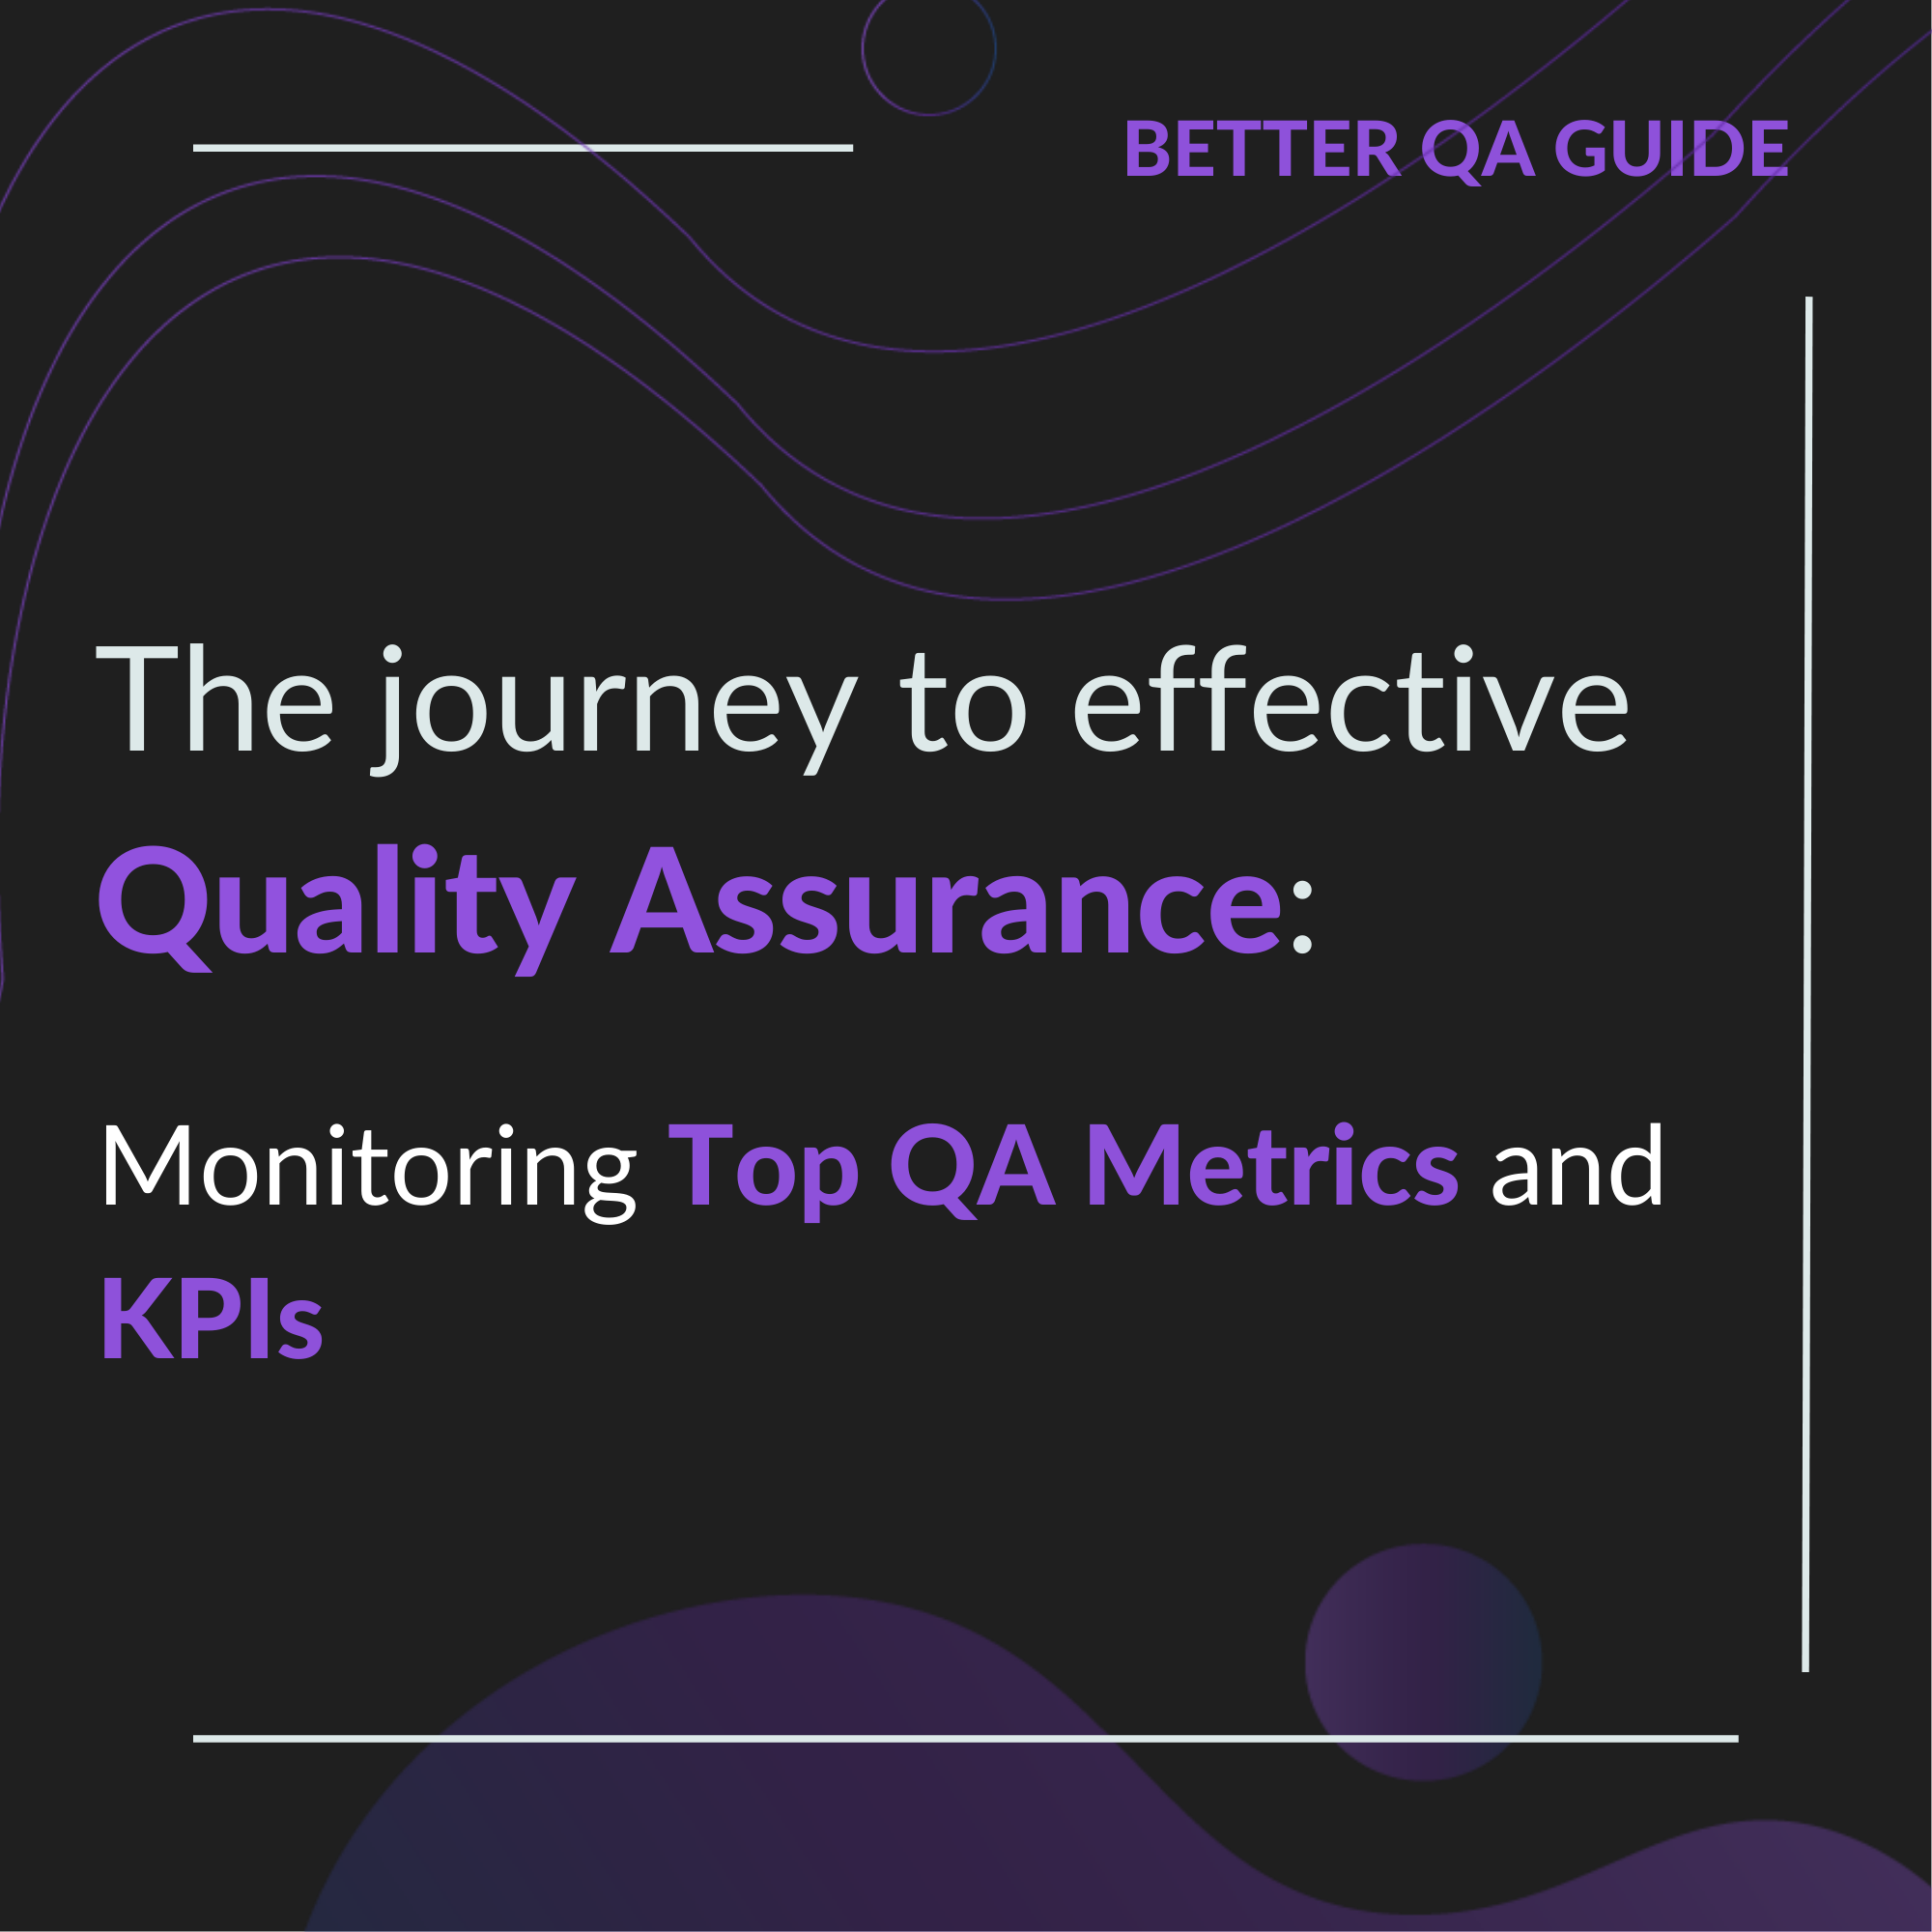 The Journey to Effective Quality Assurance Monitoring Top QA Metrics and KPIs